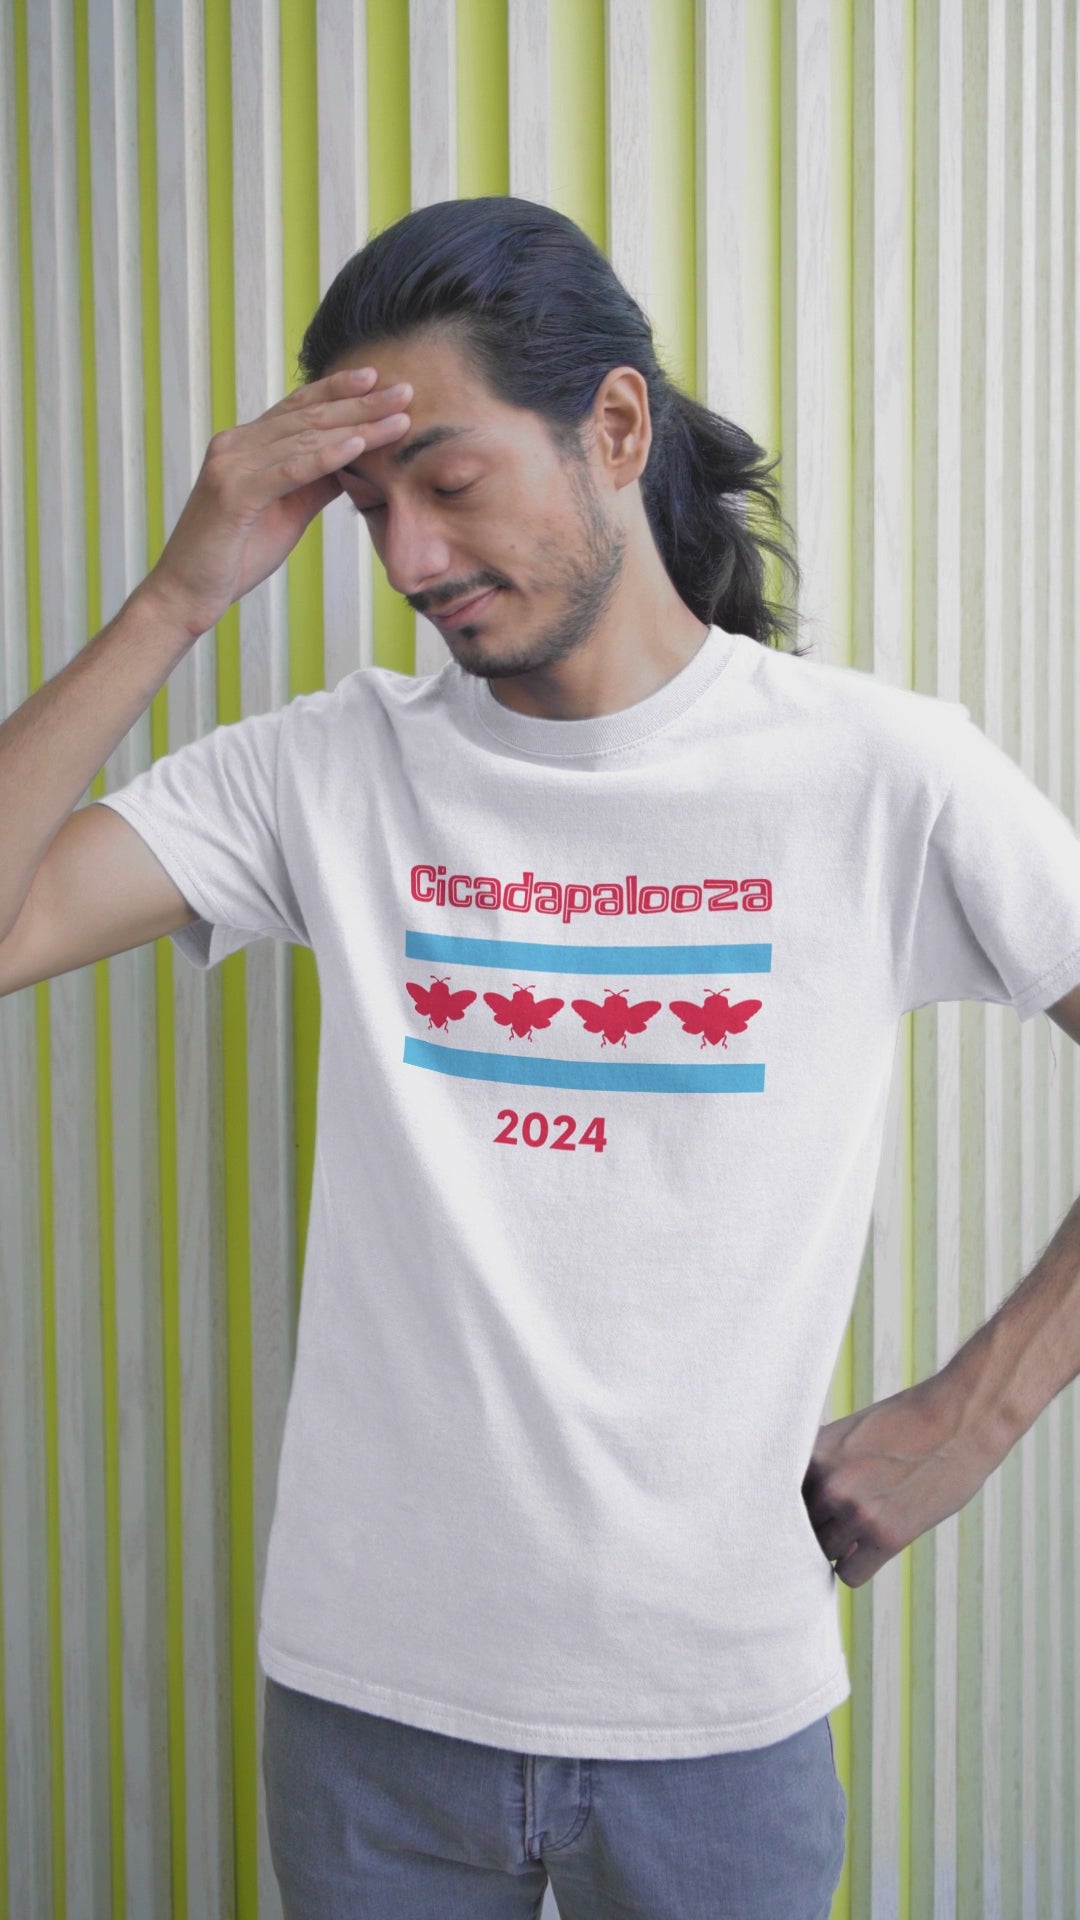 A slim man wears a white t-shirt with "Cicadapalooza" printed on it and the Chicago flag with the red stars replaced by cute, red cicadas. In the video, his face expresses worry and disapproval.